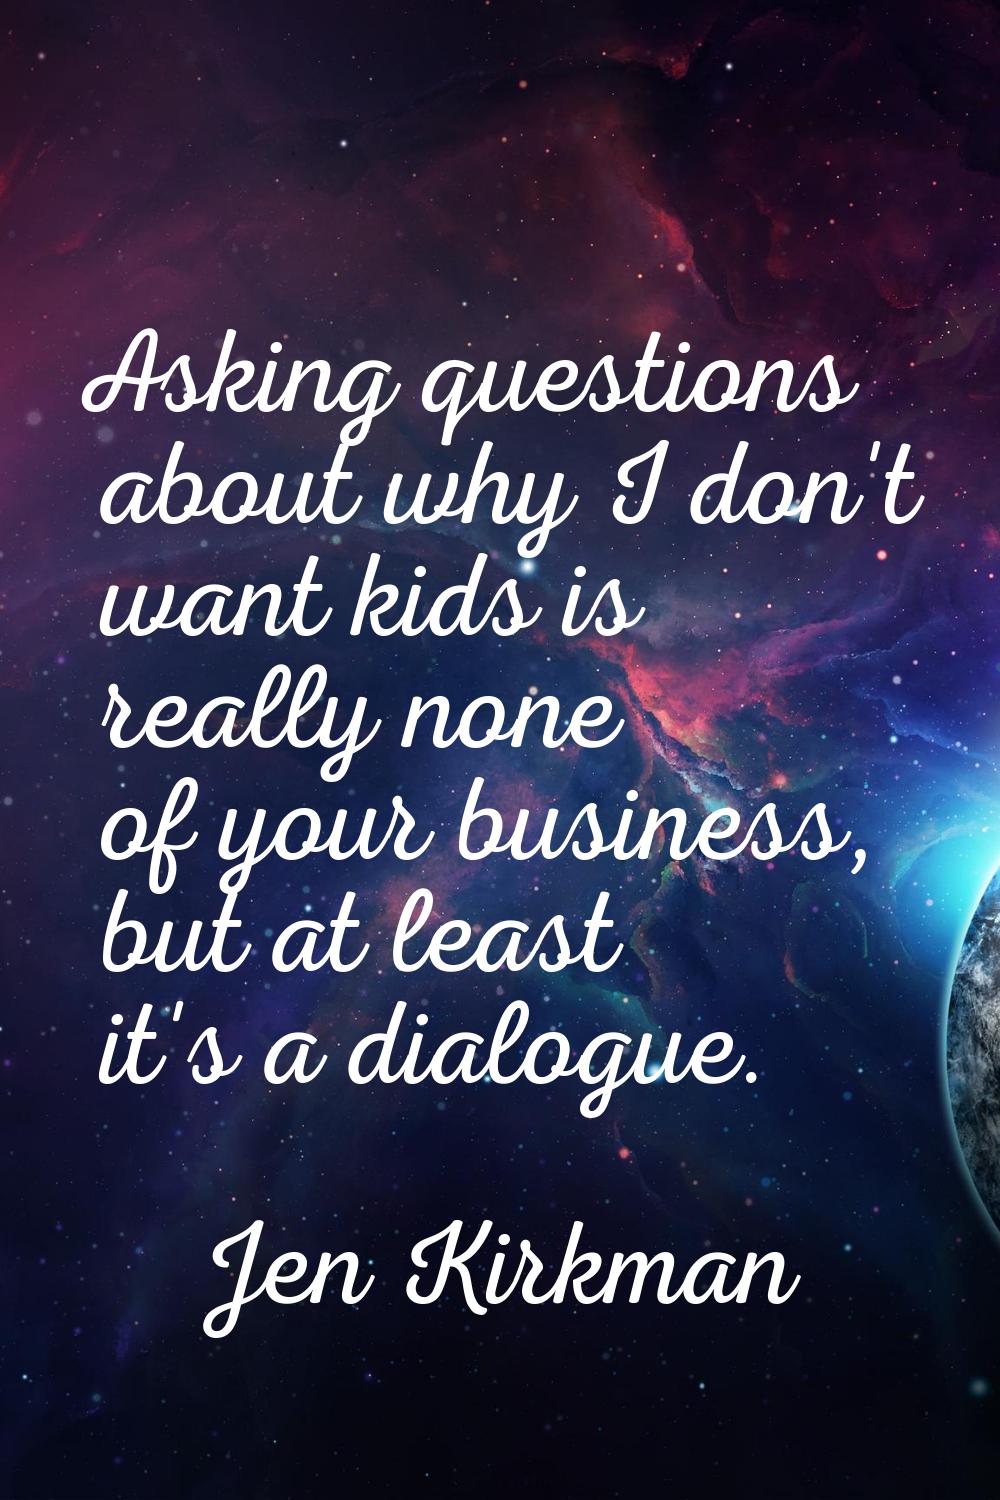 Asking questions about why I don't want kids is really none of your business, but at least it's a d